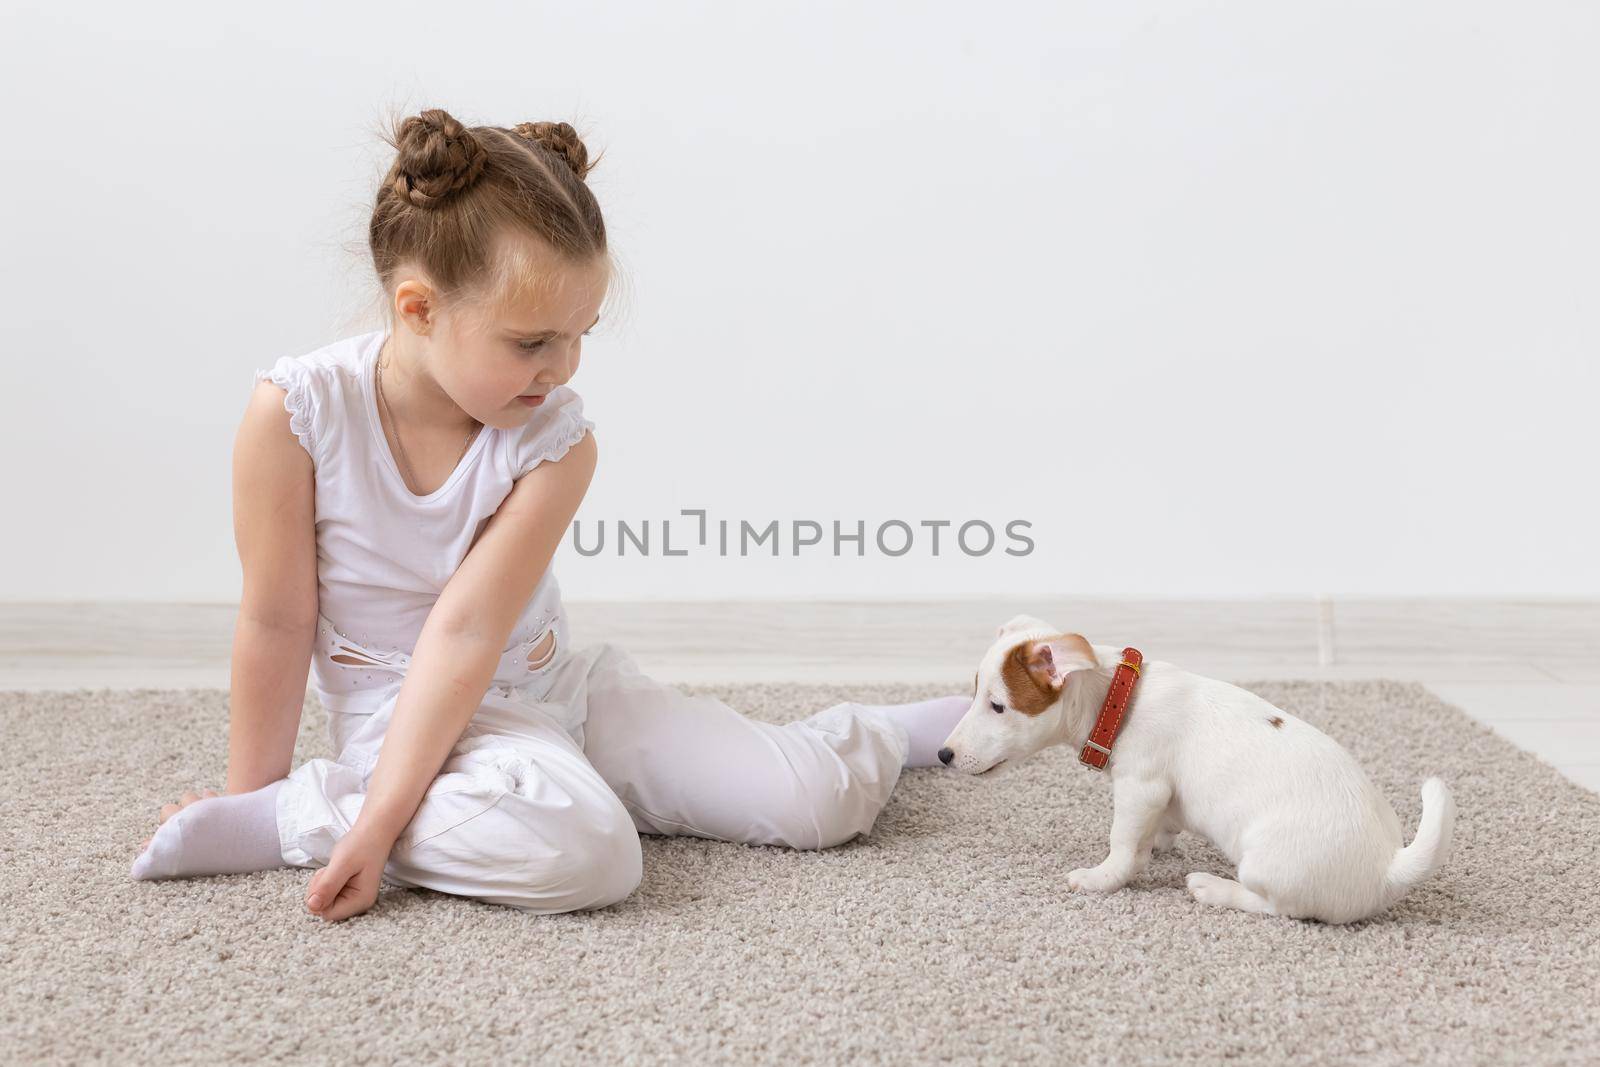 Children, pets and animal concept - Child girl play with her puppy indoors.